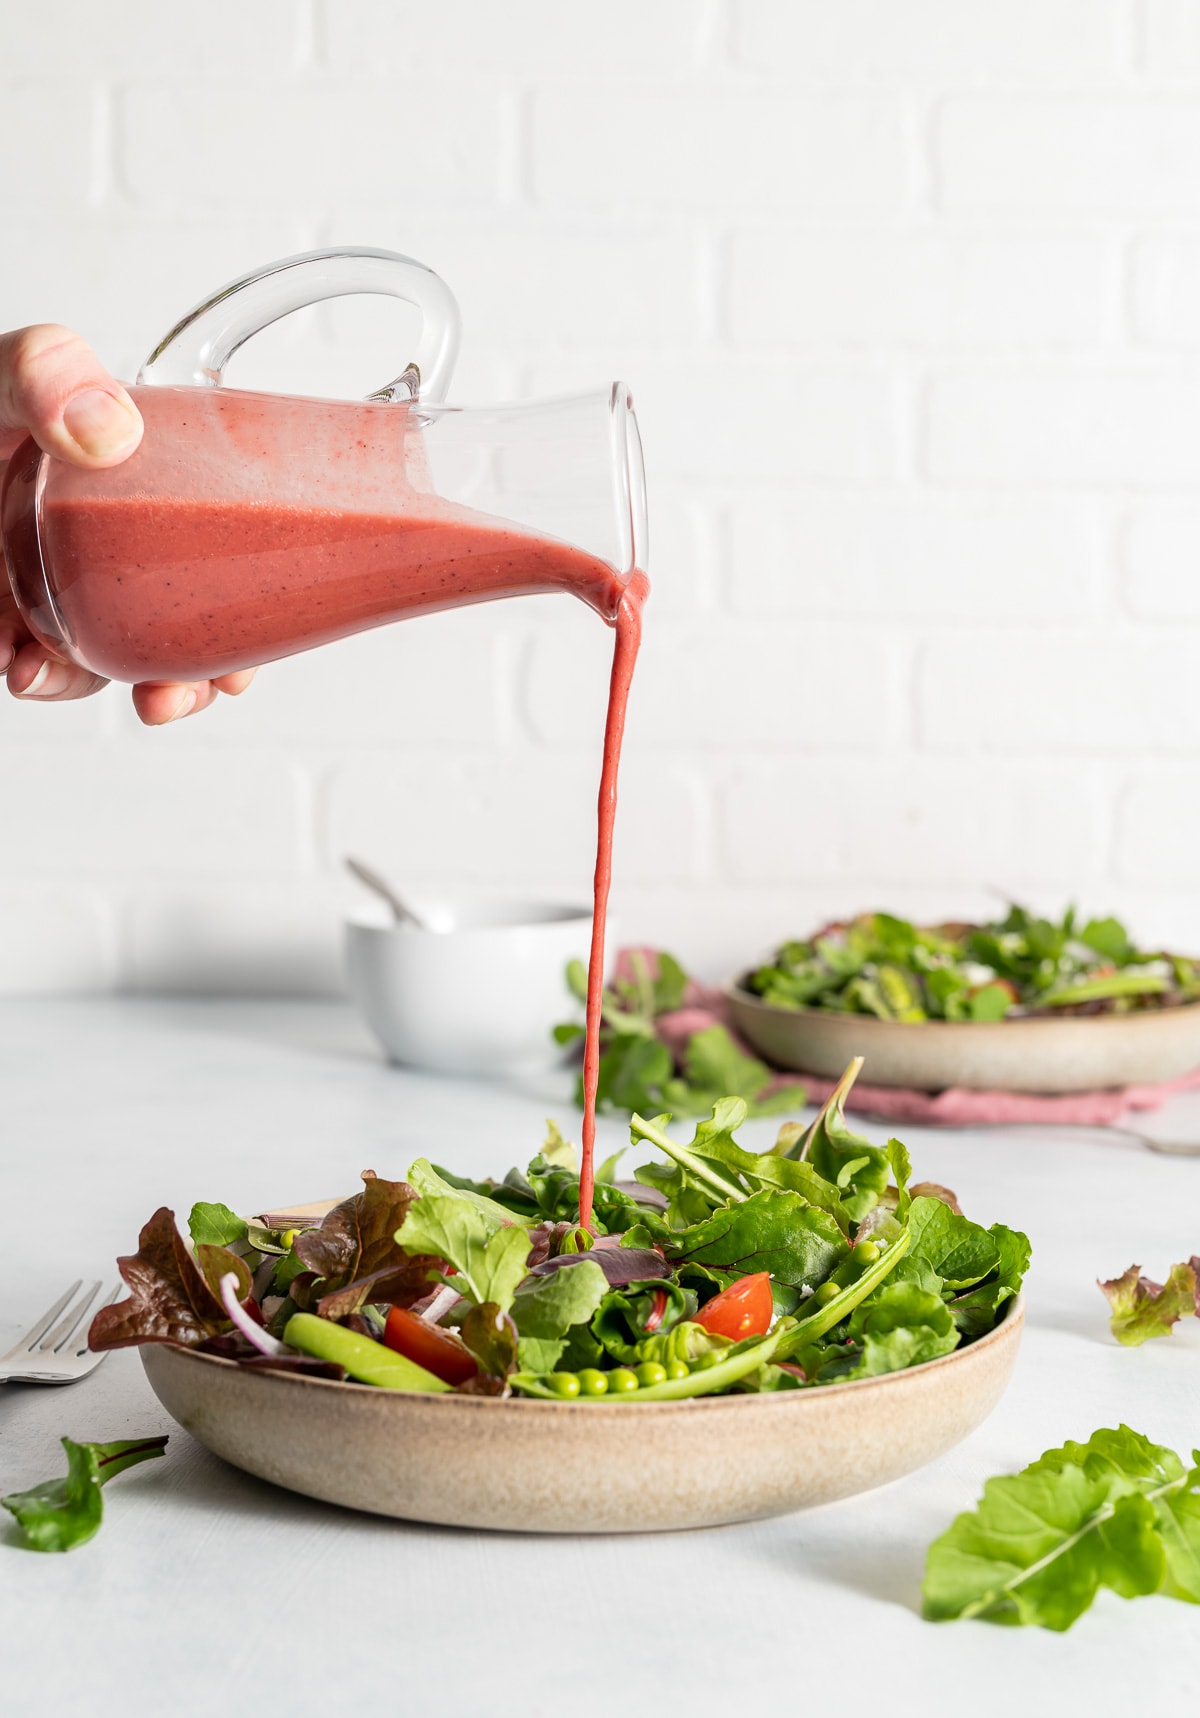 pink hibiscus vinaigrette dressing being poured onto a bowl of salad greens